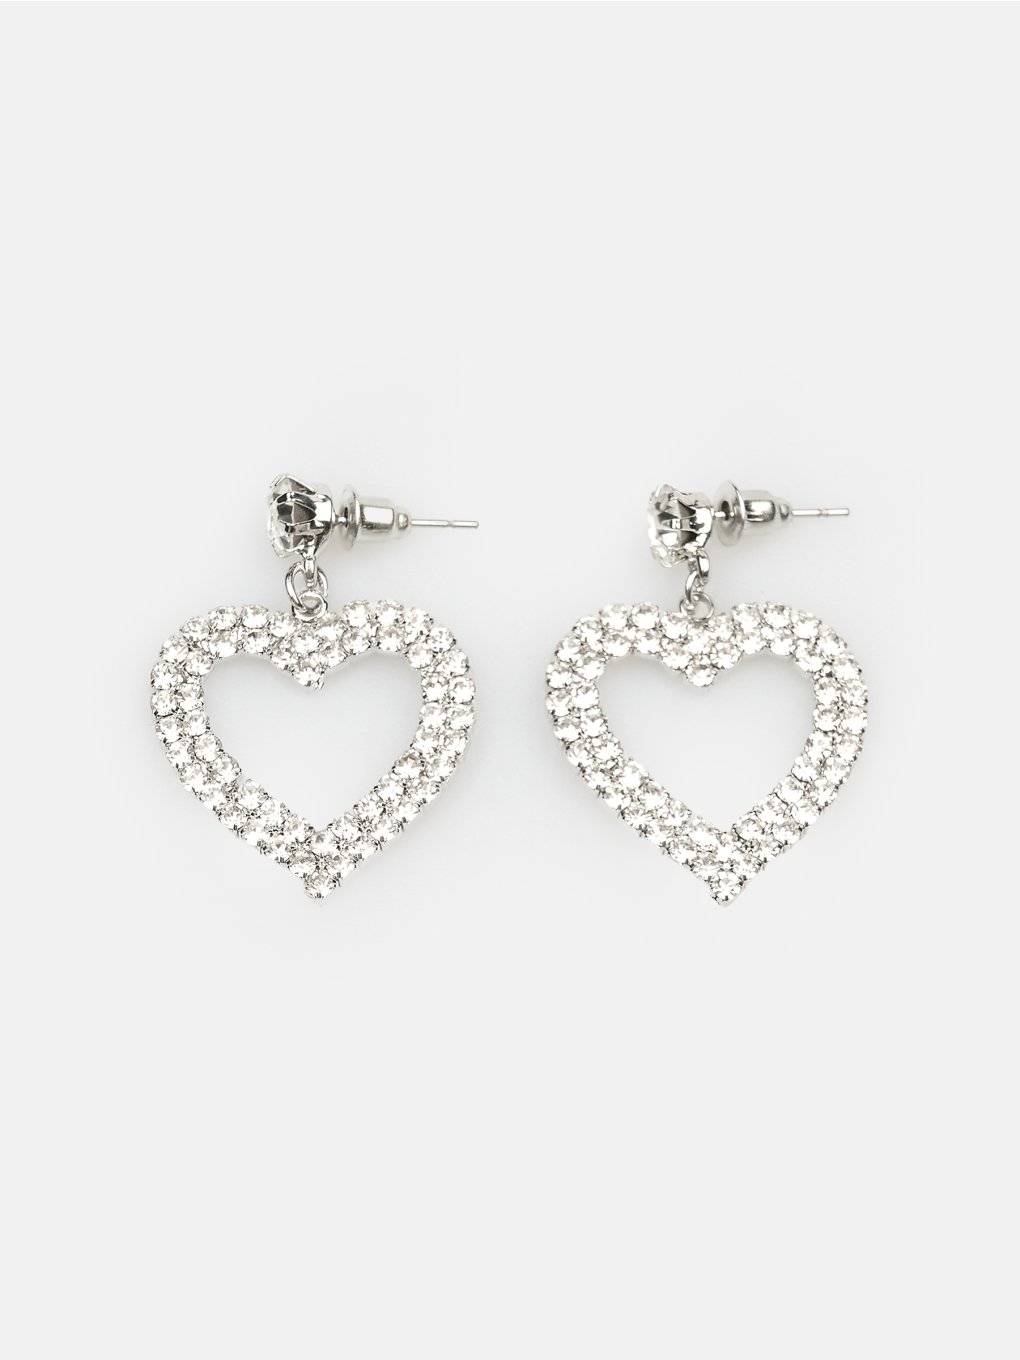 Heart shaped earrings with faux stones